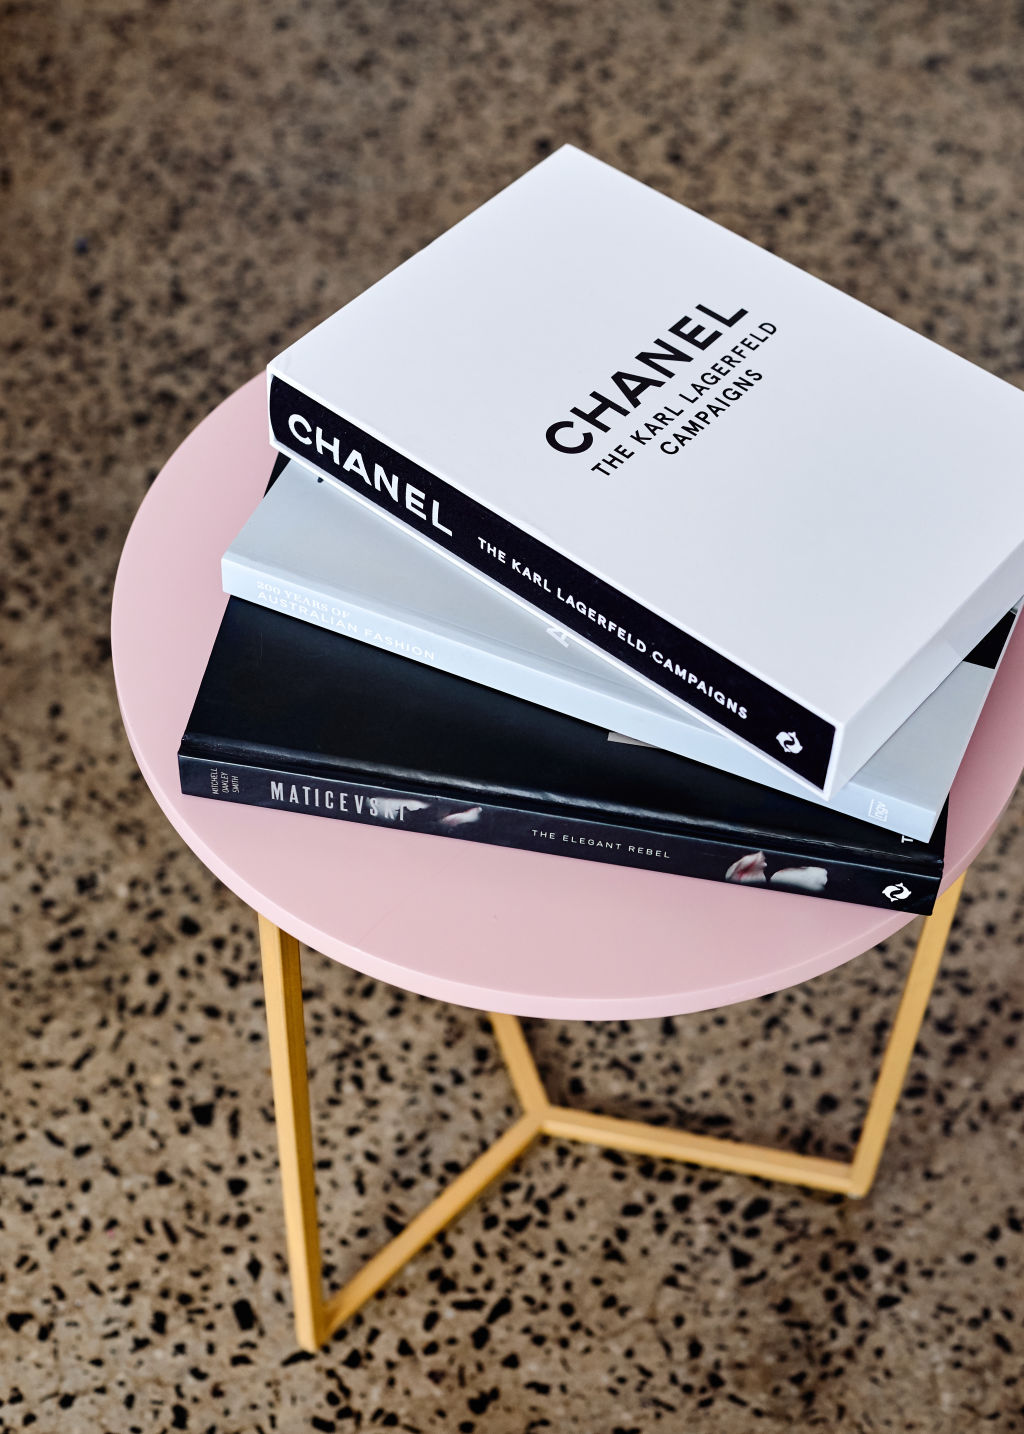 'I have always wanted to have big coffee table books around the home'. Photo: Amelia Stanwix